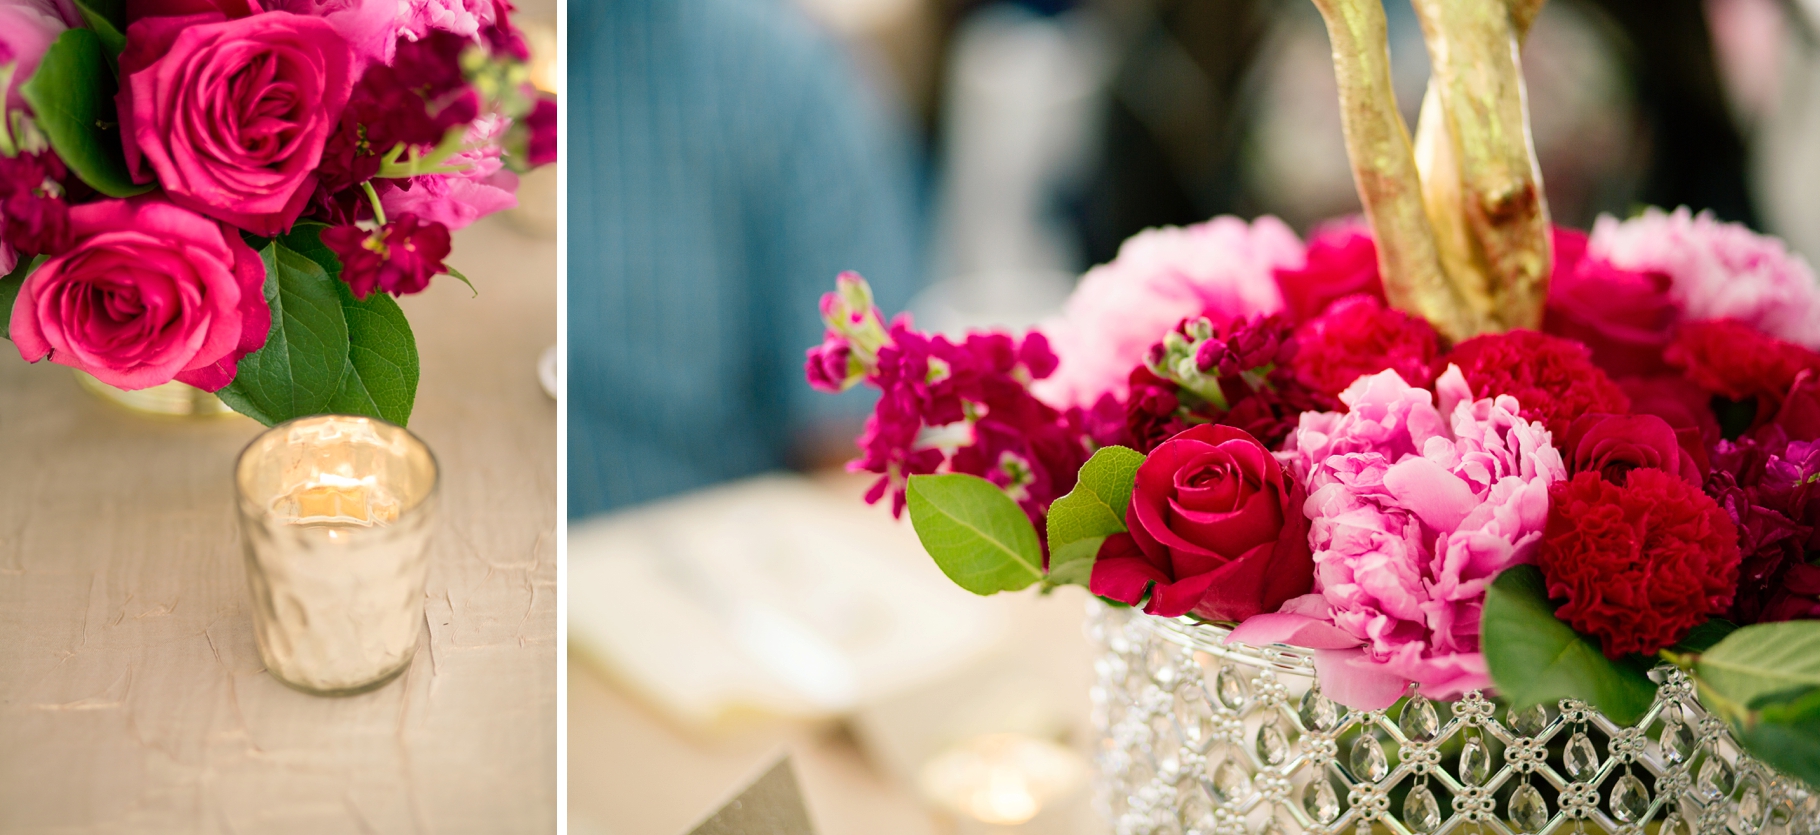 37-Reception-Gold-Candles-Pink-Peonies-Table-Settings-Rock-Creek-Gardens-Seattle-Wedding-Photography-by-Betty-Elaine